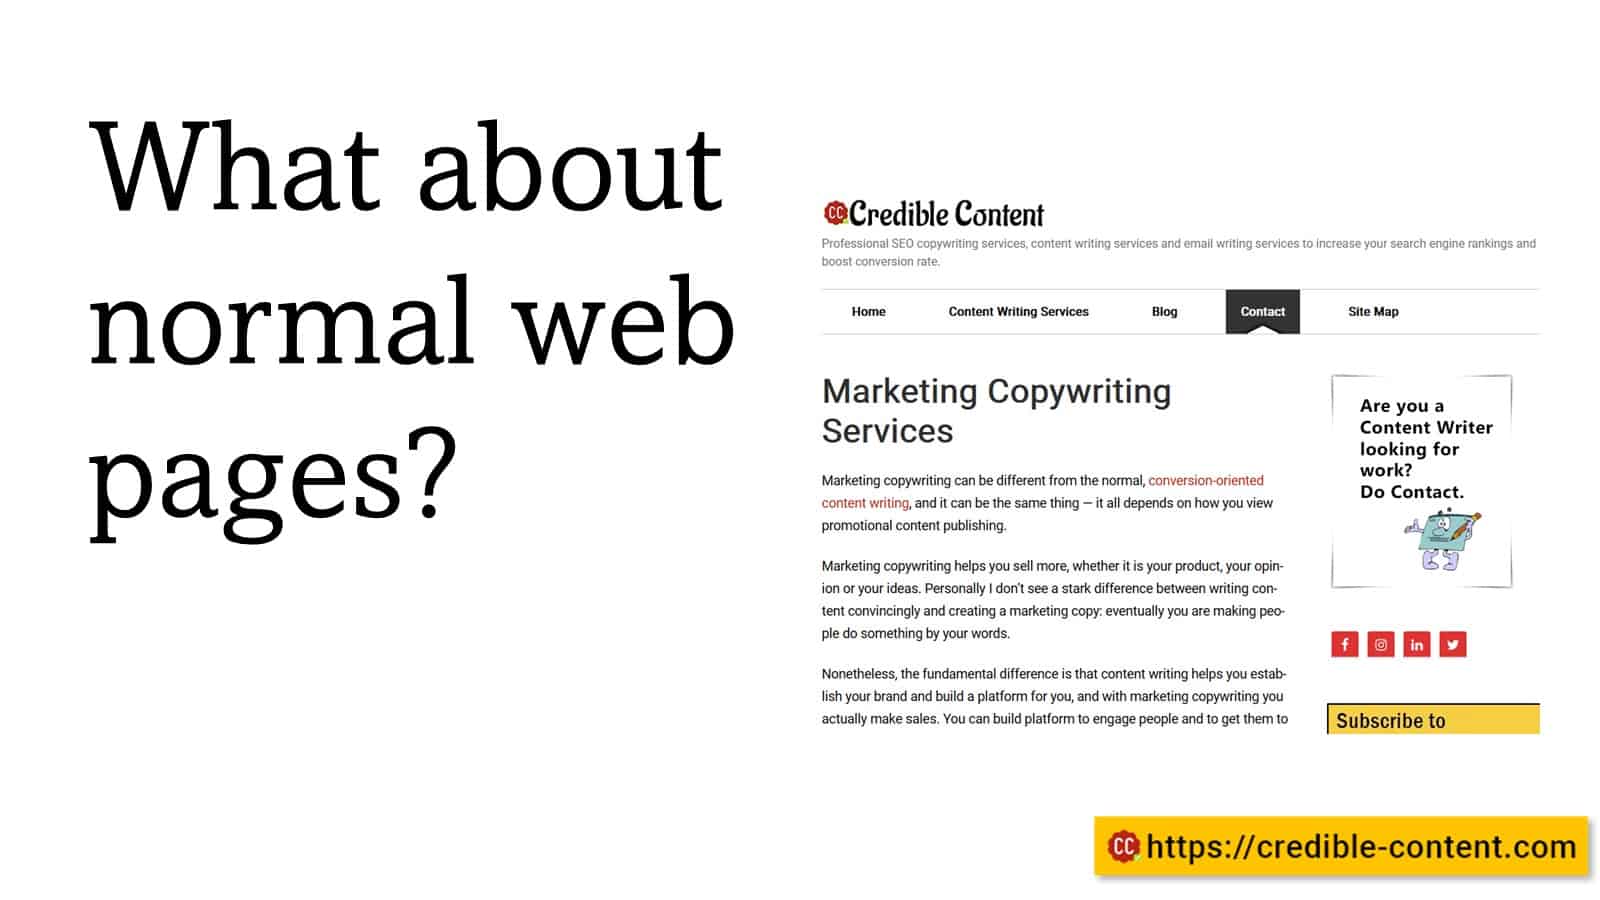 What about normal web pages